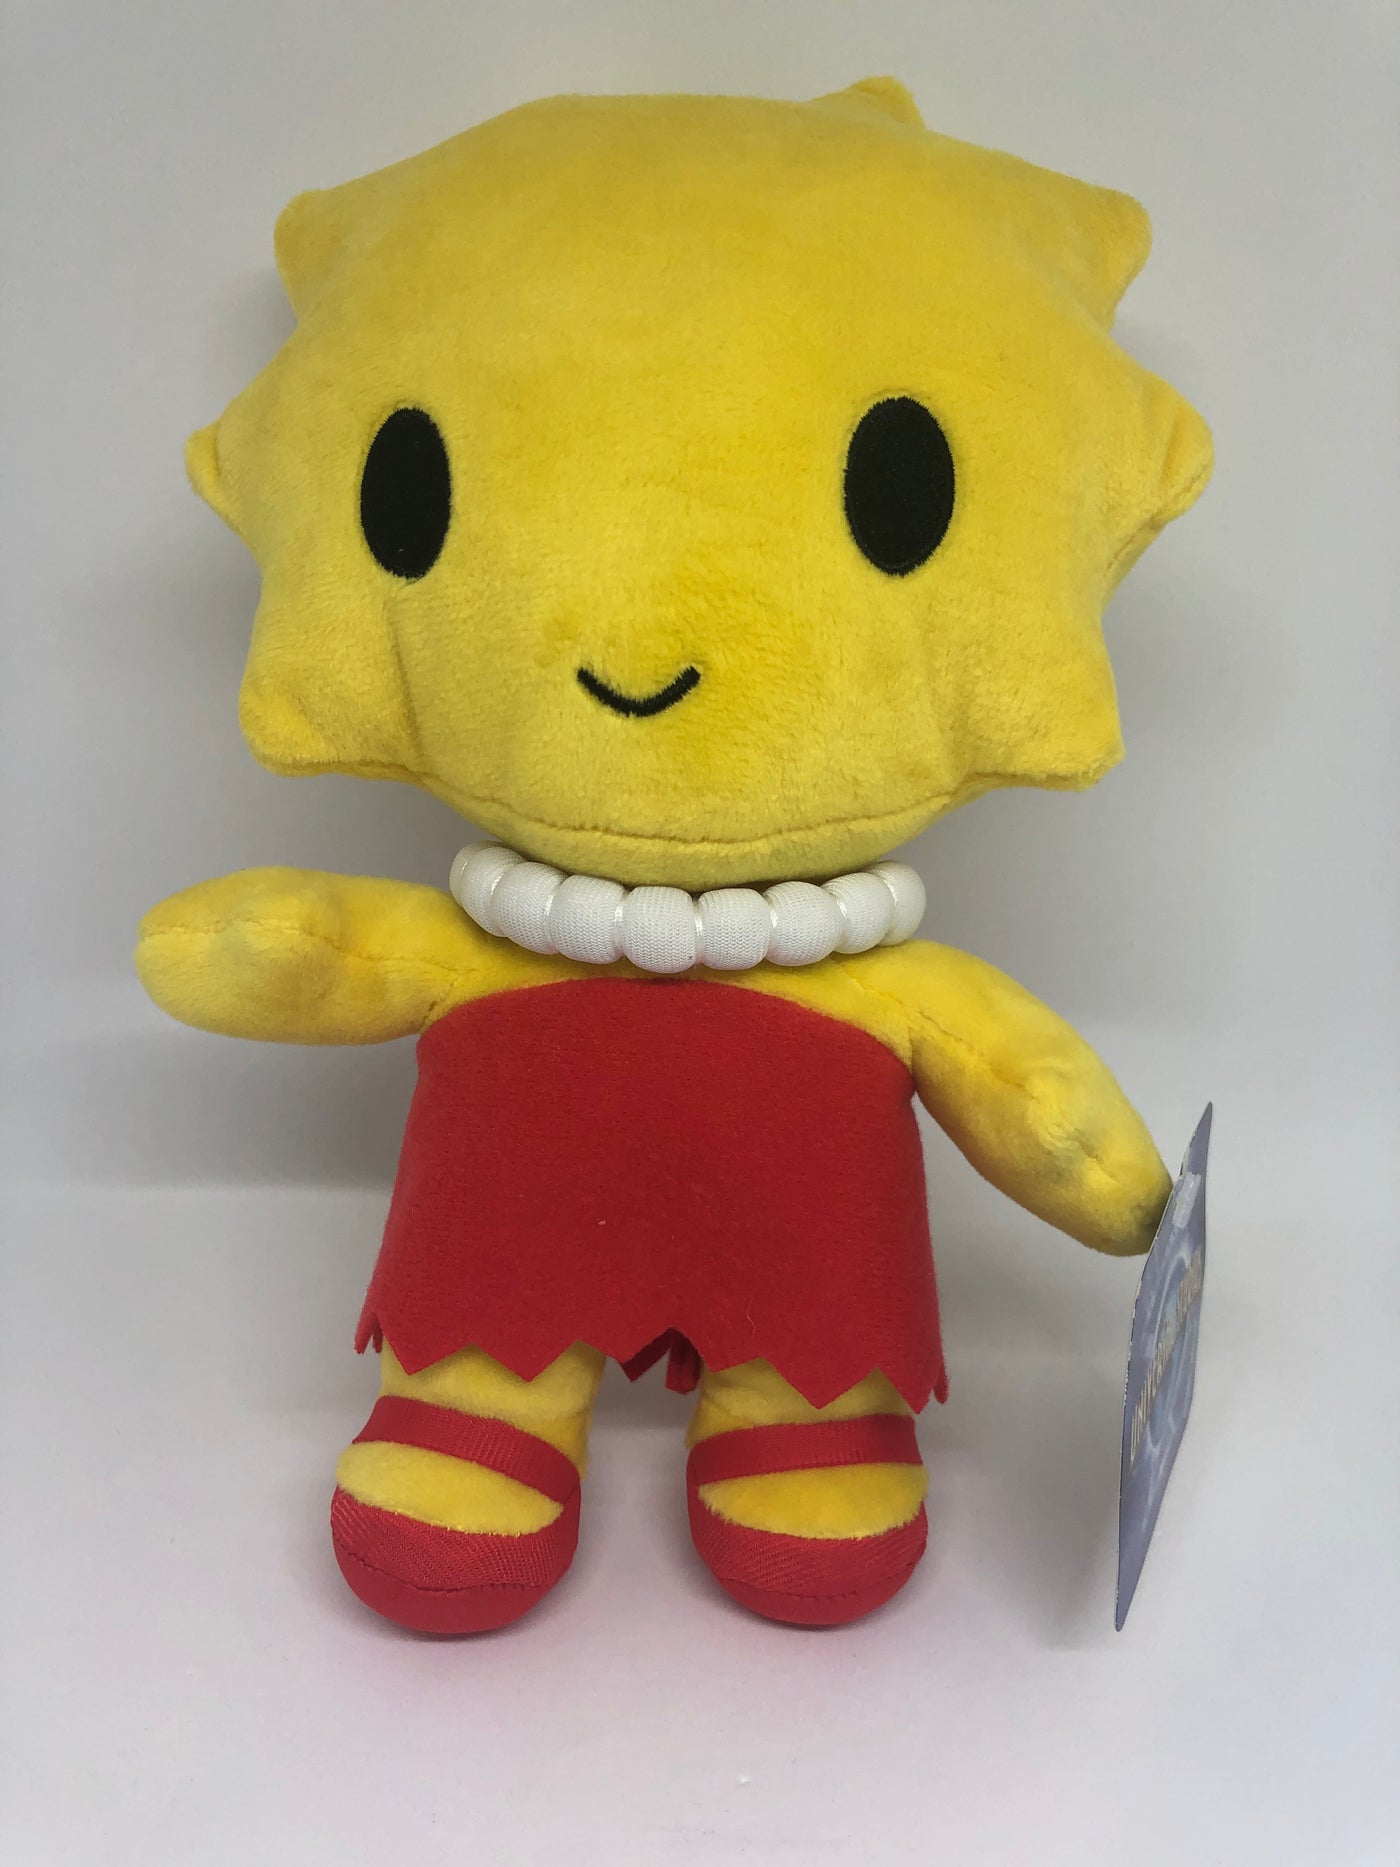 Universal Studios The Simpsons Cutie Lisa Doll Plush New with Tag